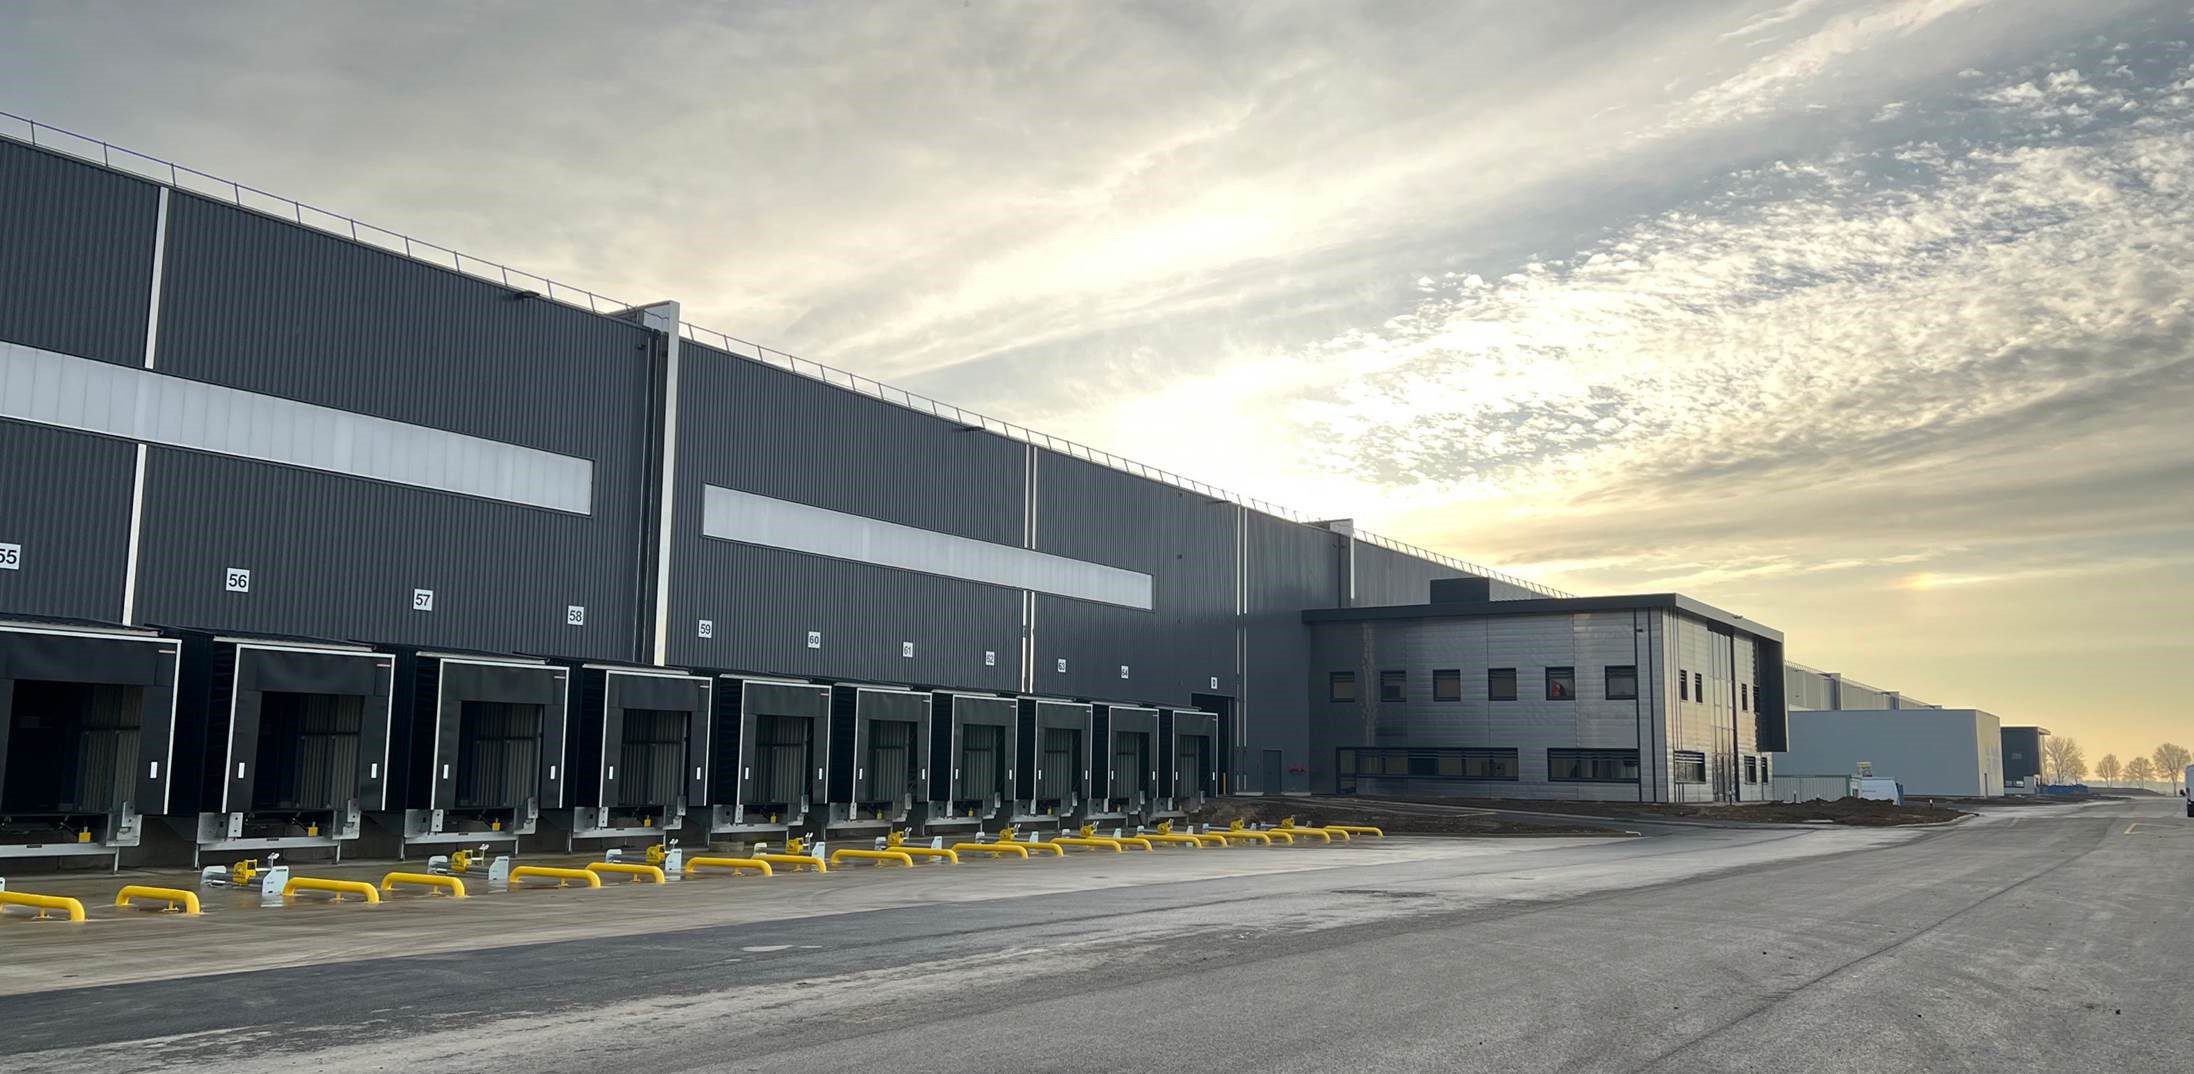 Exterior loading area of GLP Park Ablaincourt with multiple loading bays and black walls